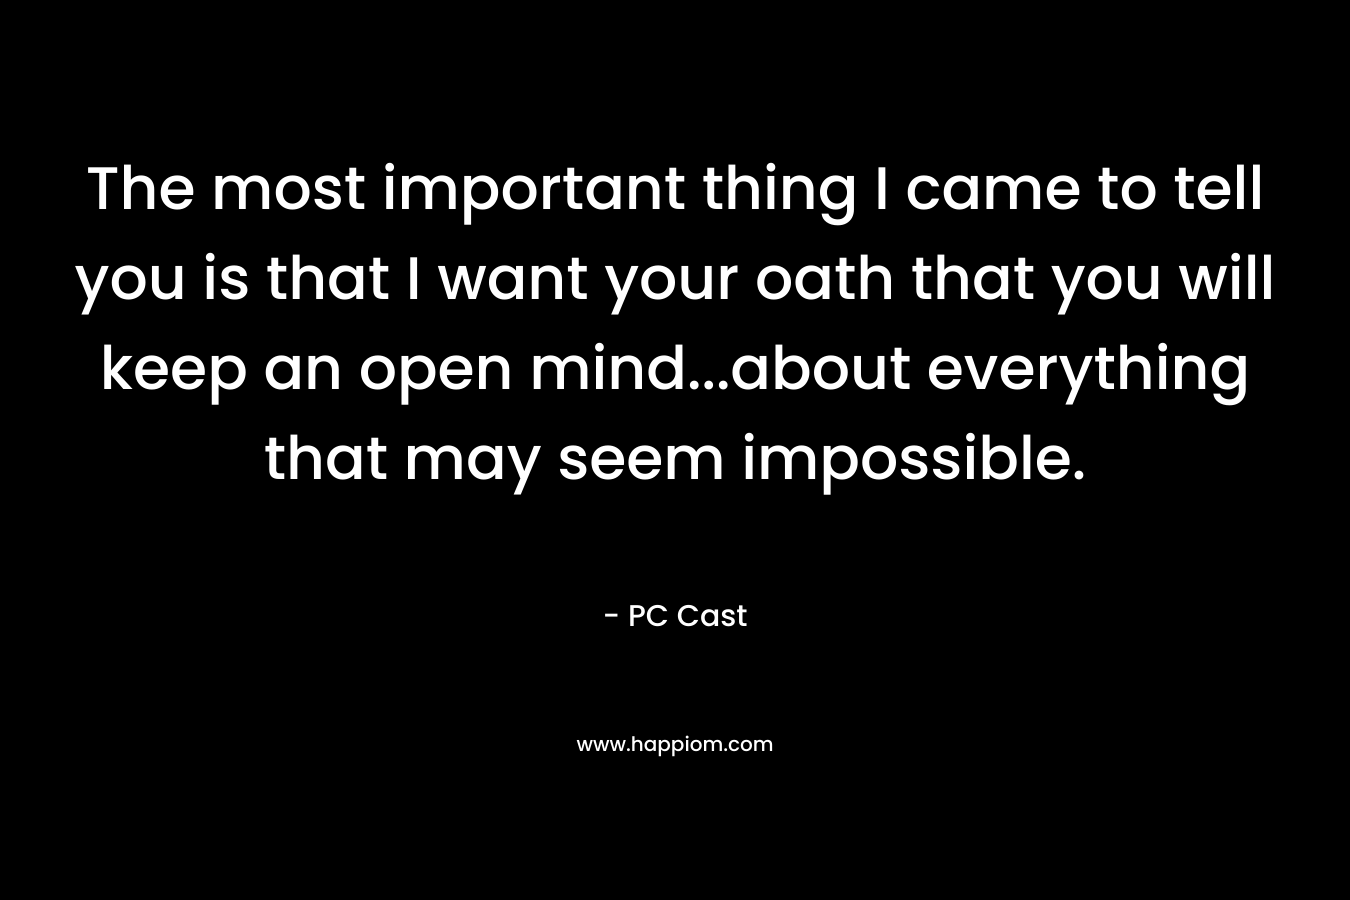 The most important thing I came to tell you is that I want your oath that you will keep an open mind…about everything that may seem impossible. – PC Cast